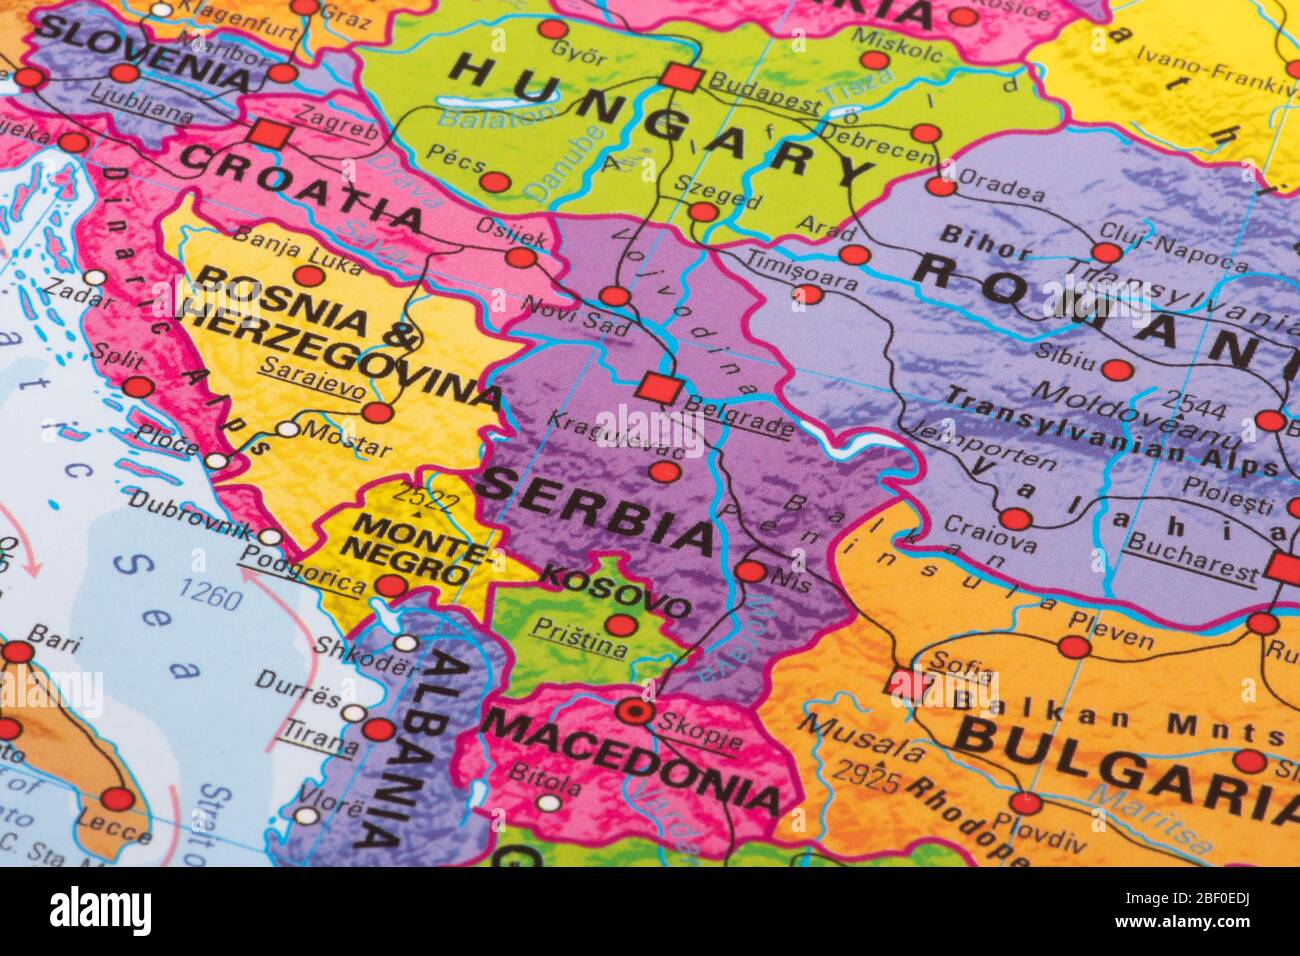 Europe, map of Serbia Stock Photo